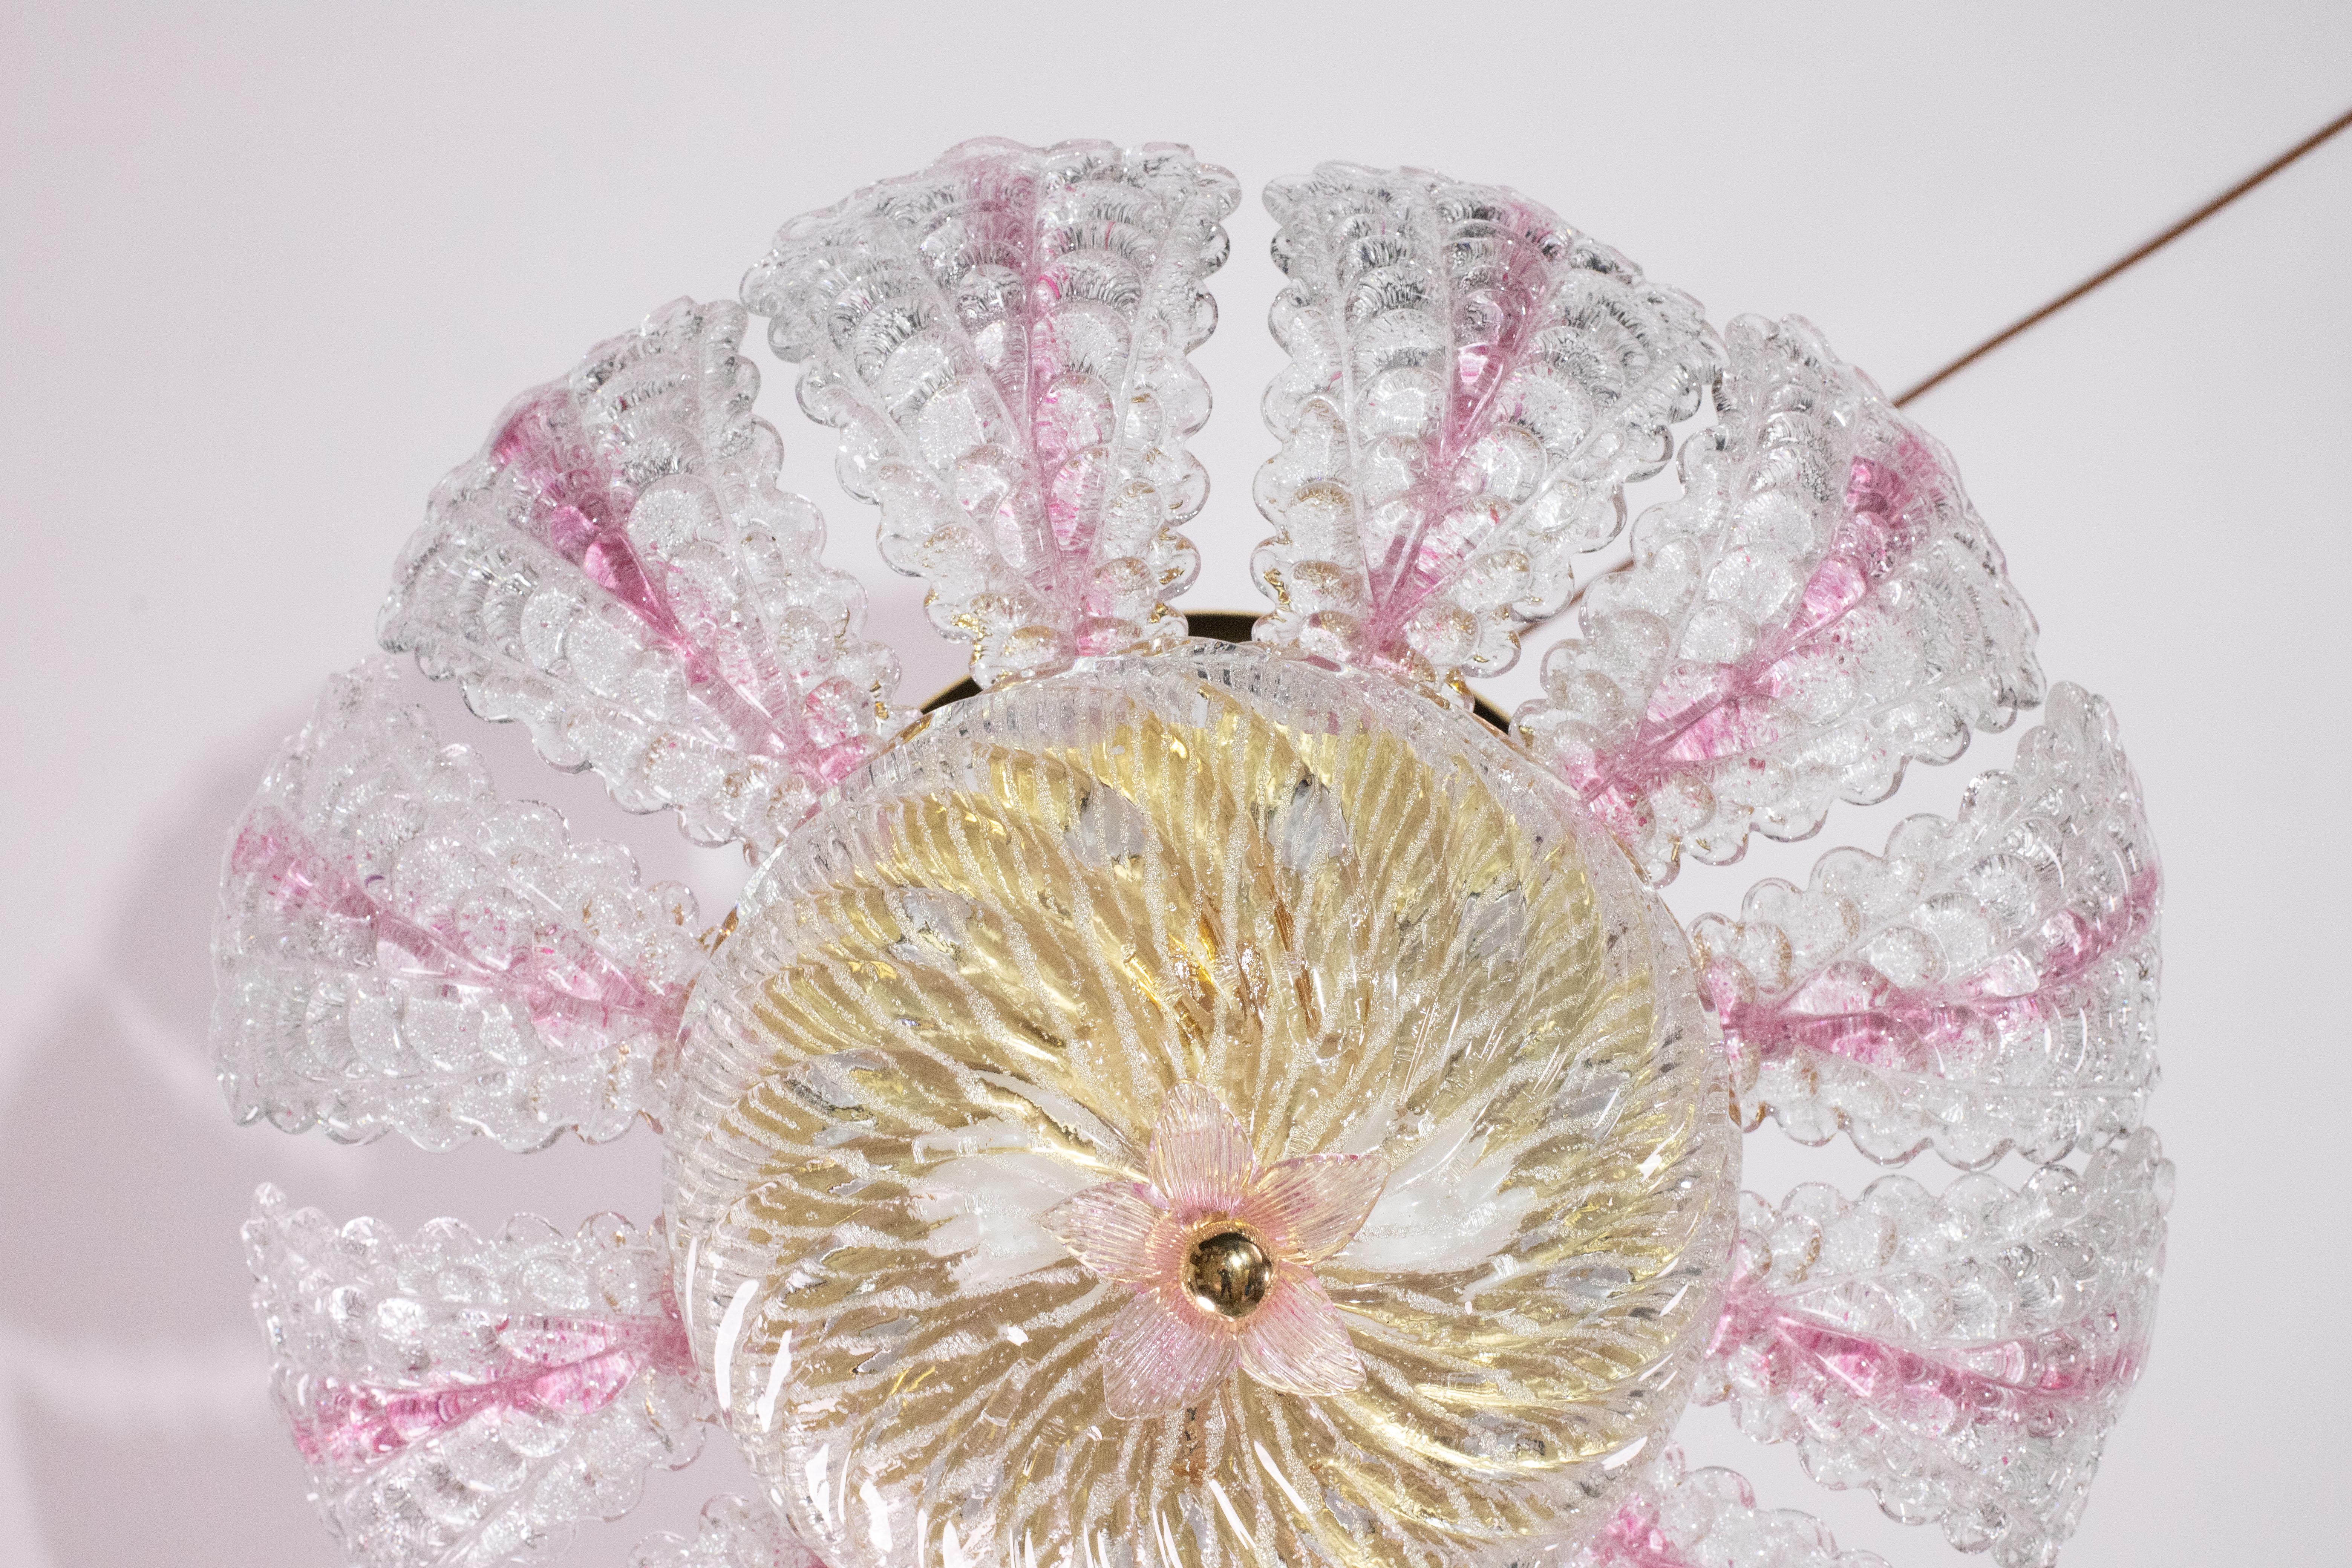 Charming Pink Murano Glass Leave Ceiling Light or Chandelier, 1970s For Sale 7